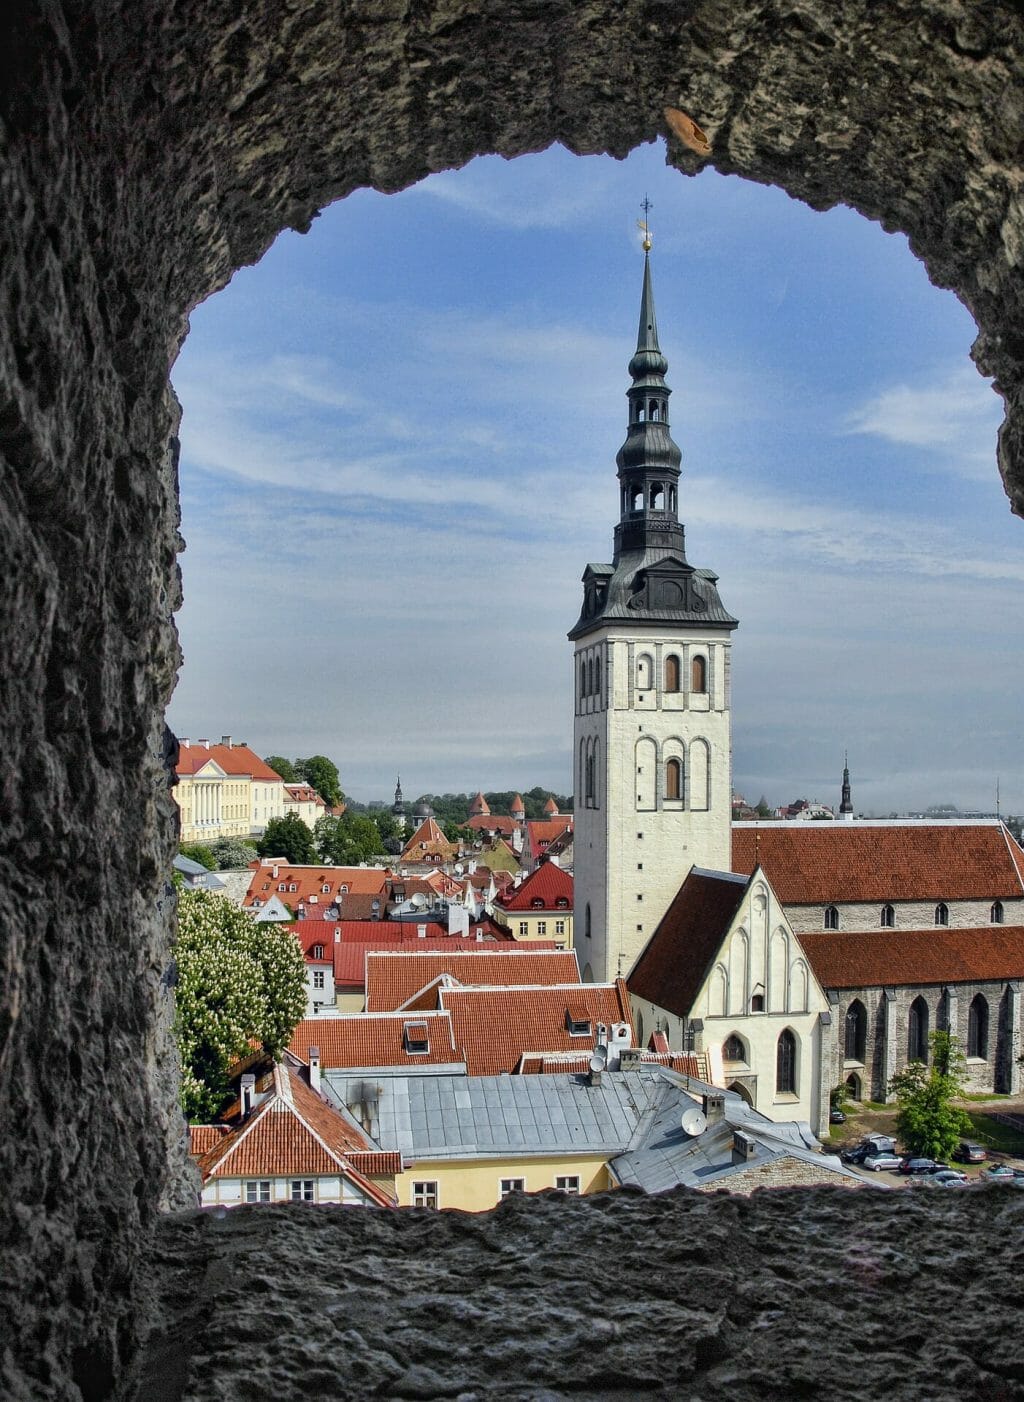 View of the church from a stone window in Estonia